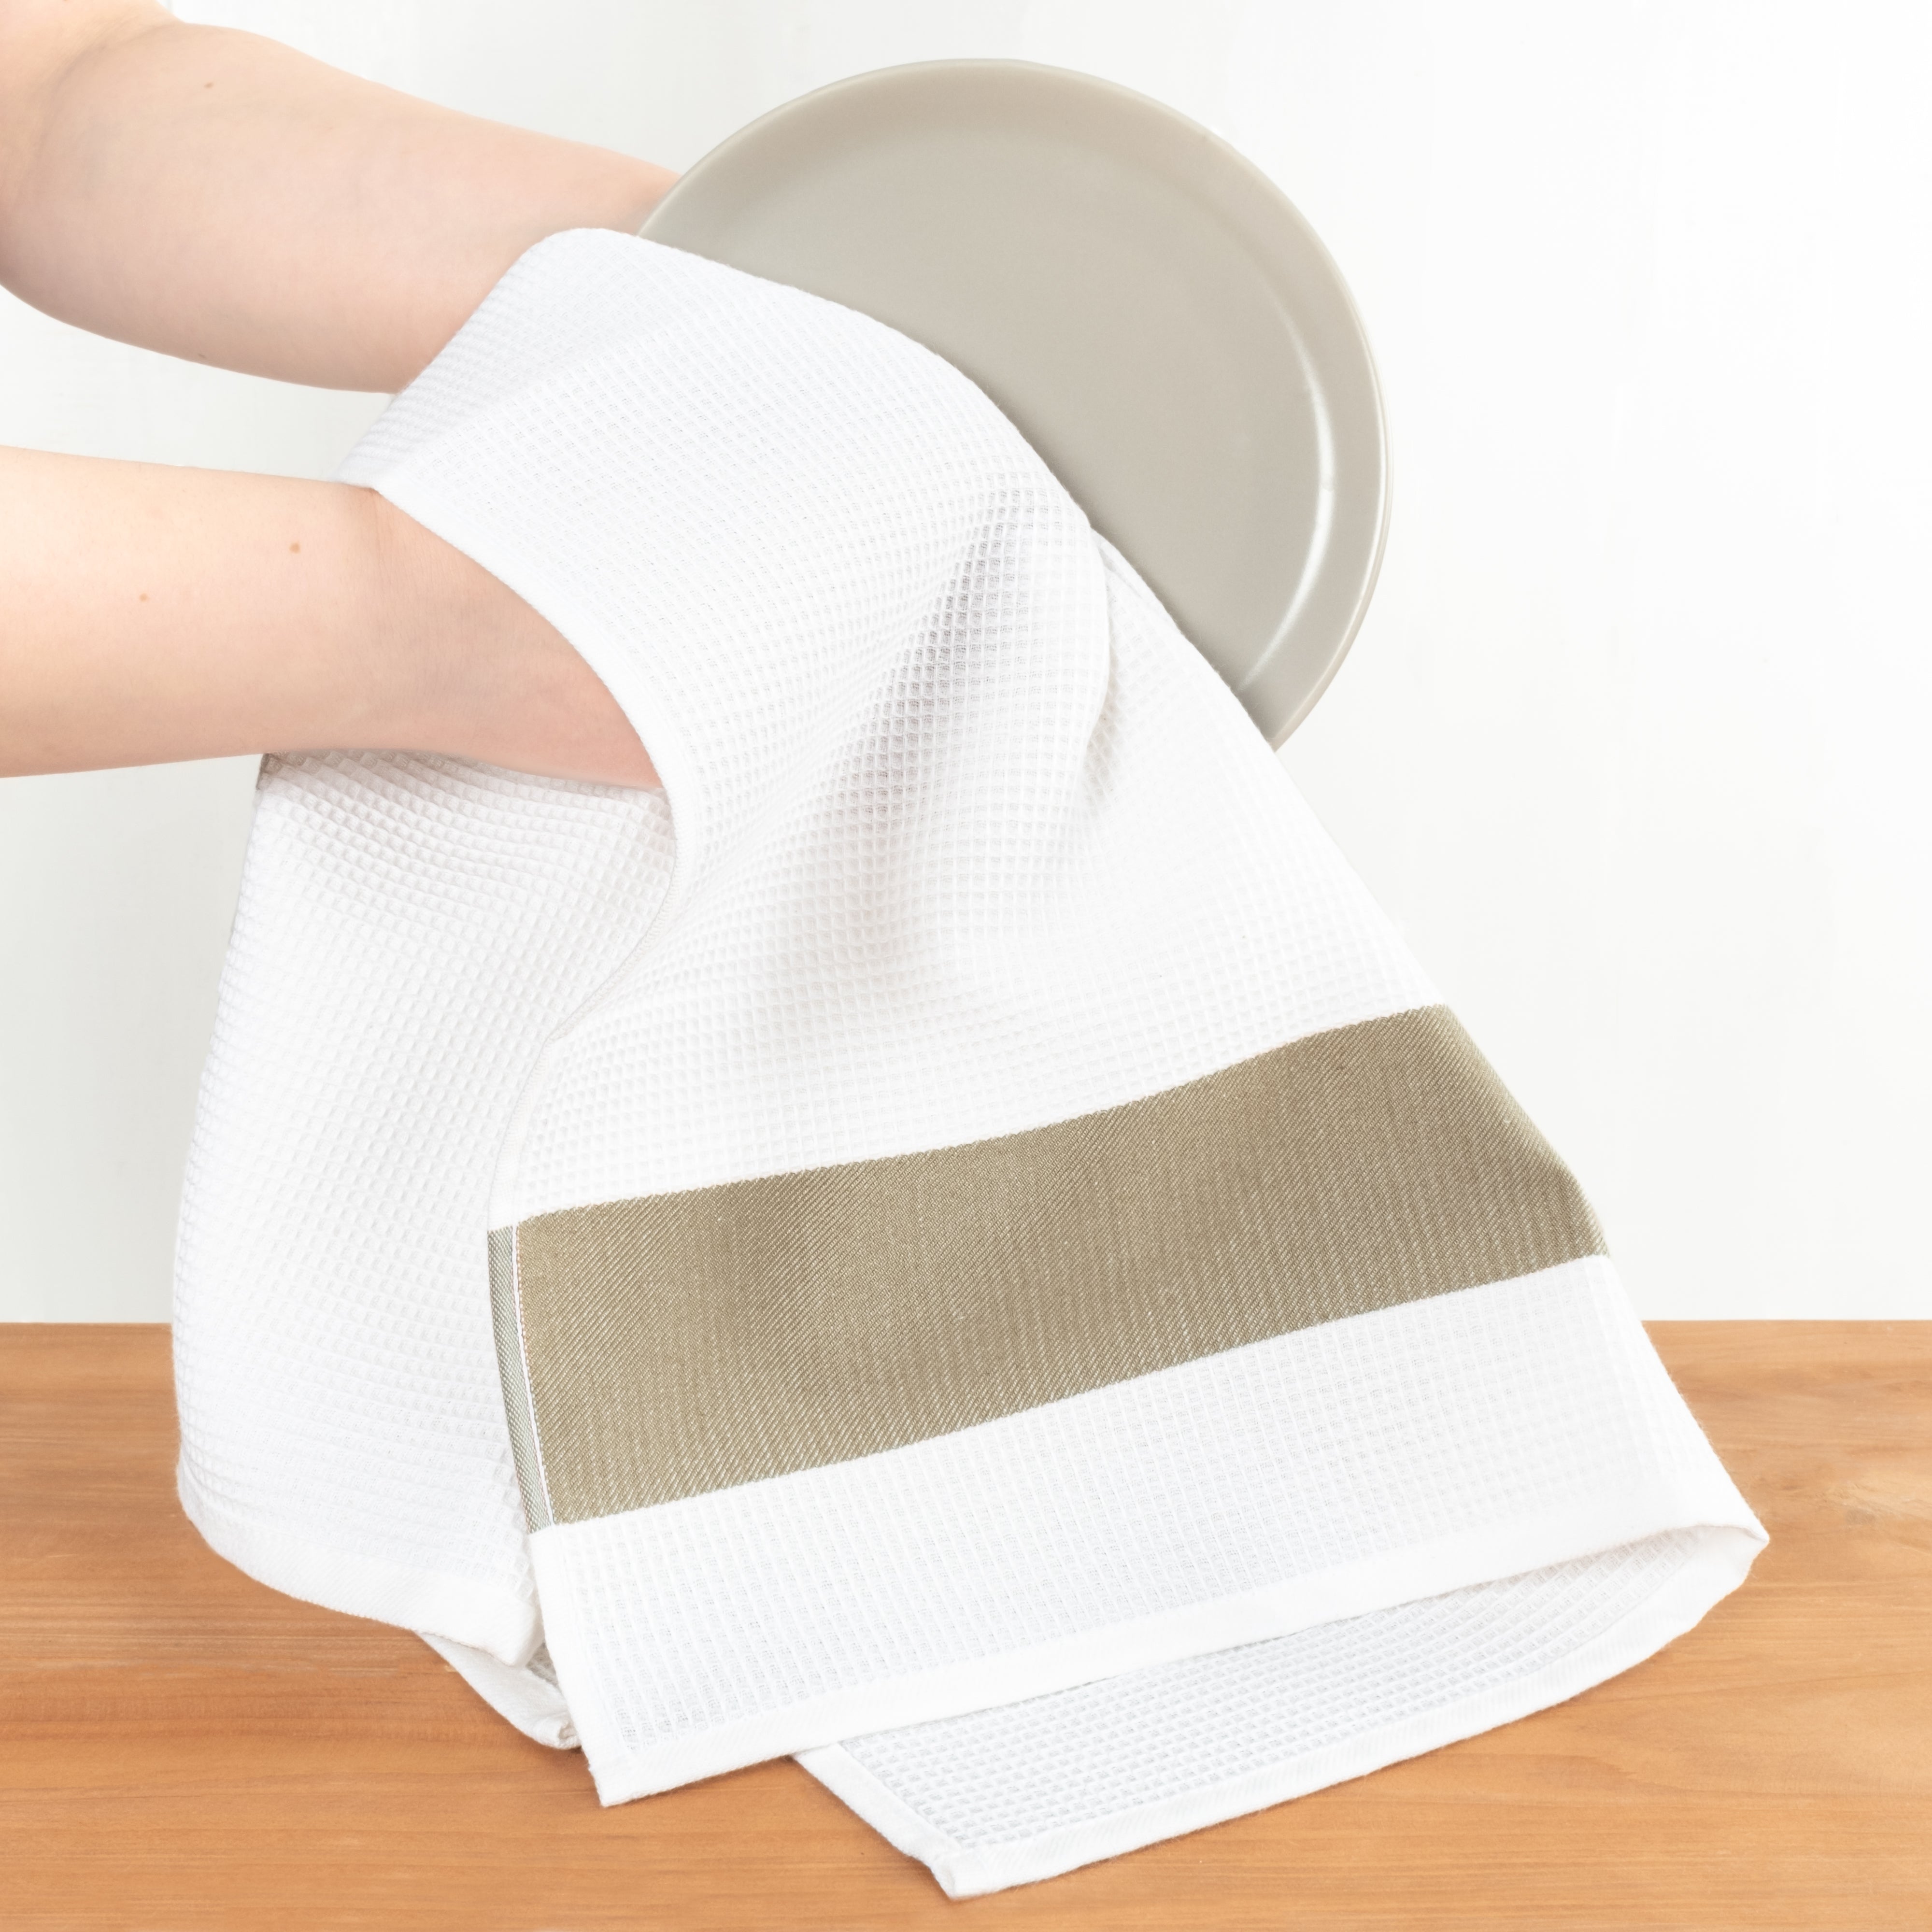 American Soft Linen 4 Packed Dish Towels, 100% Cotton Dish Cloths for Kitchen sand-taupe-2